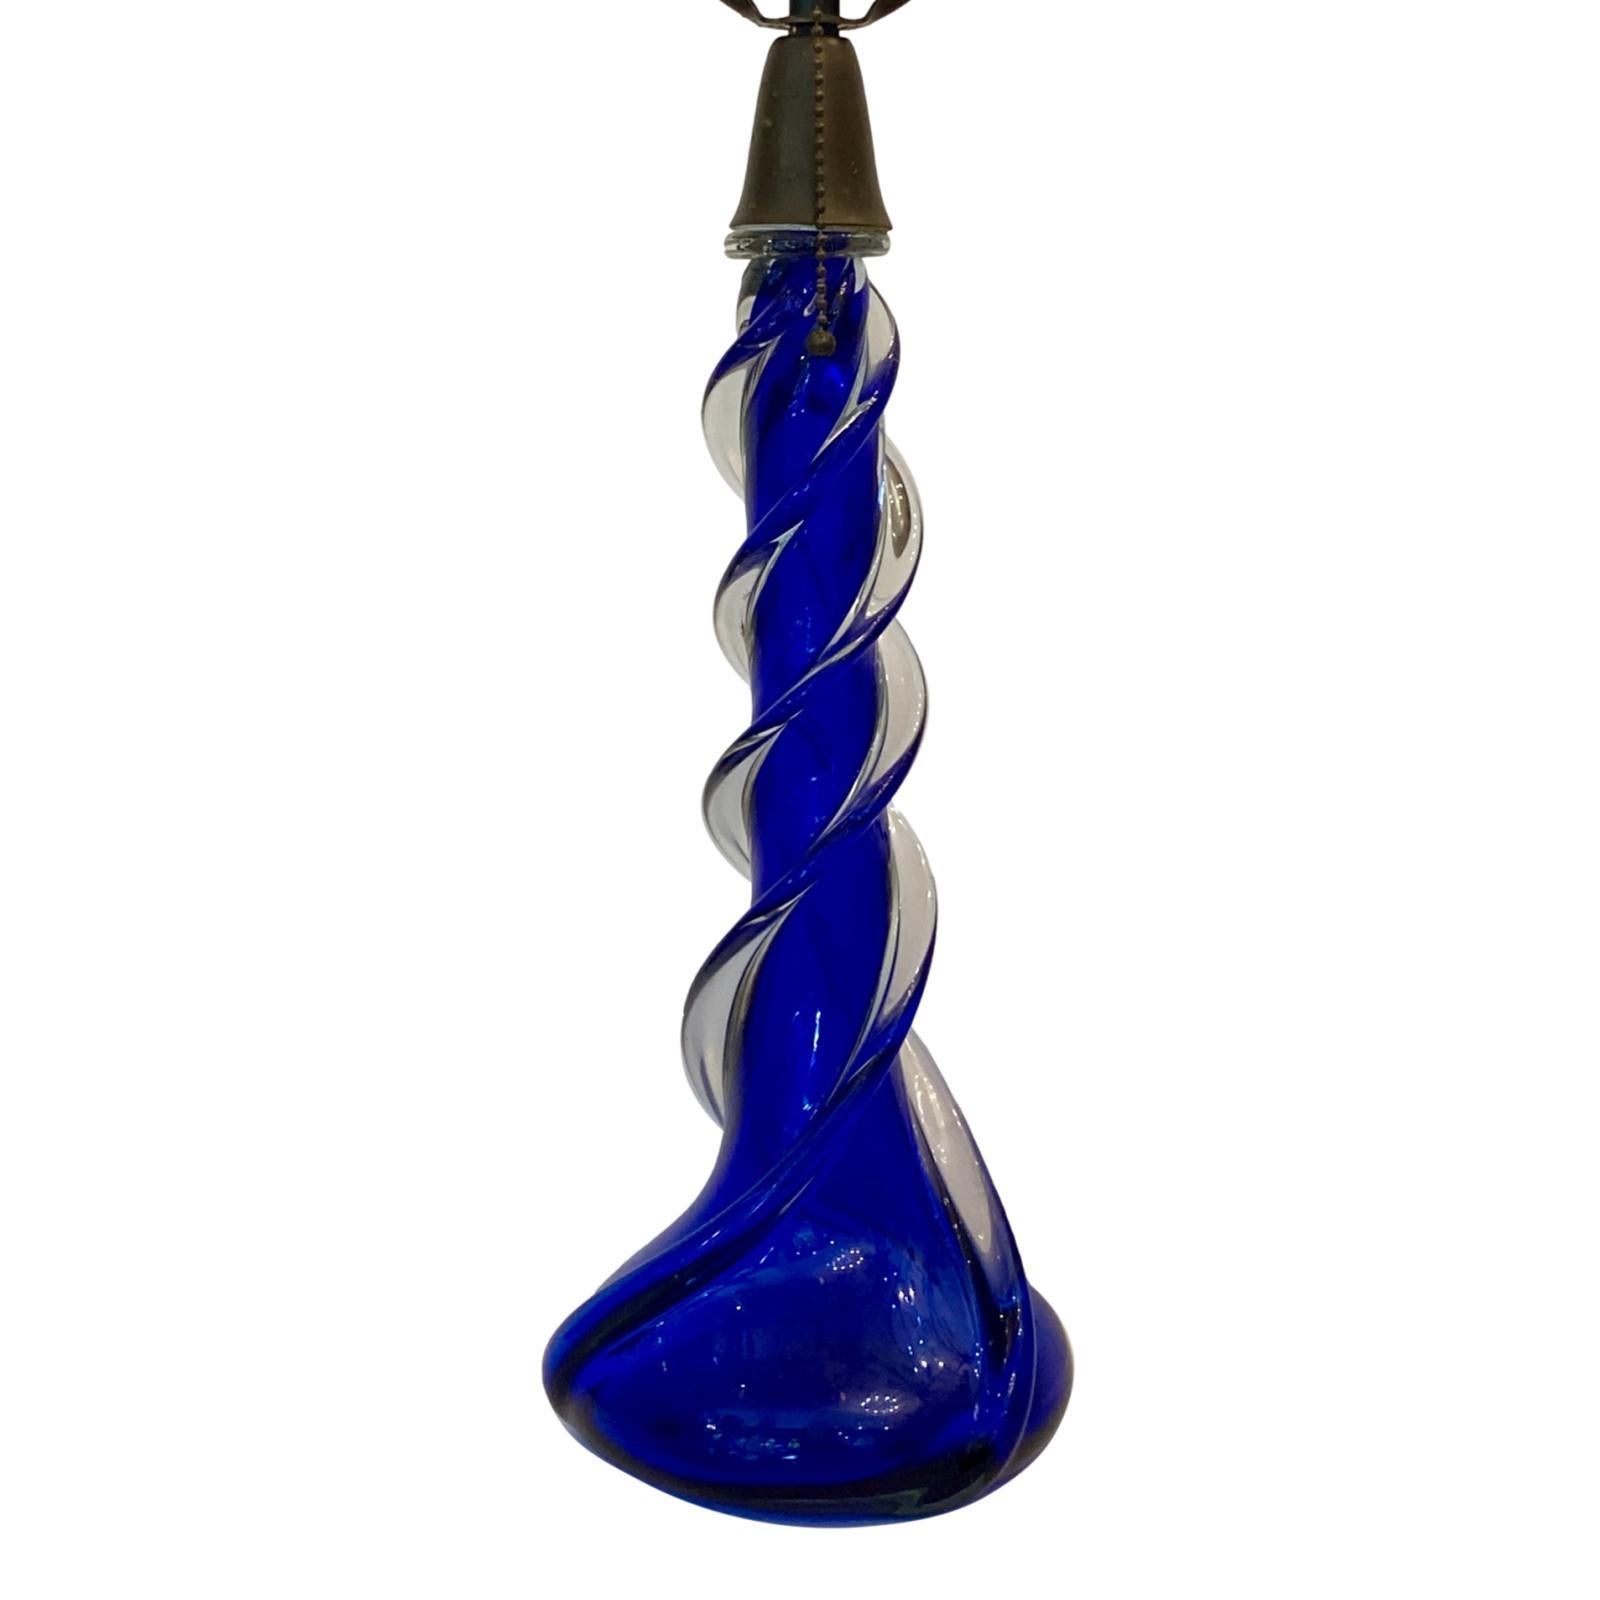 A single circa 1960’s Murano cobalt blue glass table lamp.

Measurements:
Height of body: 16